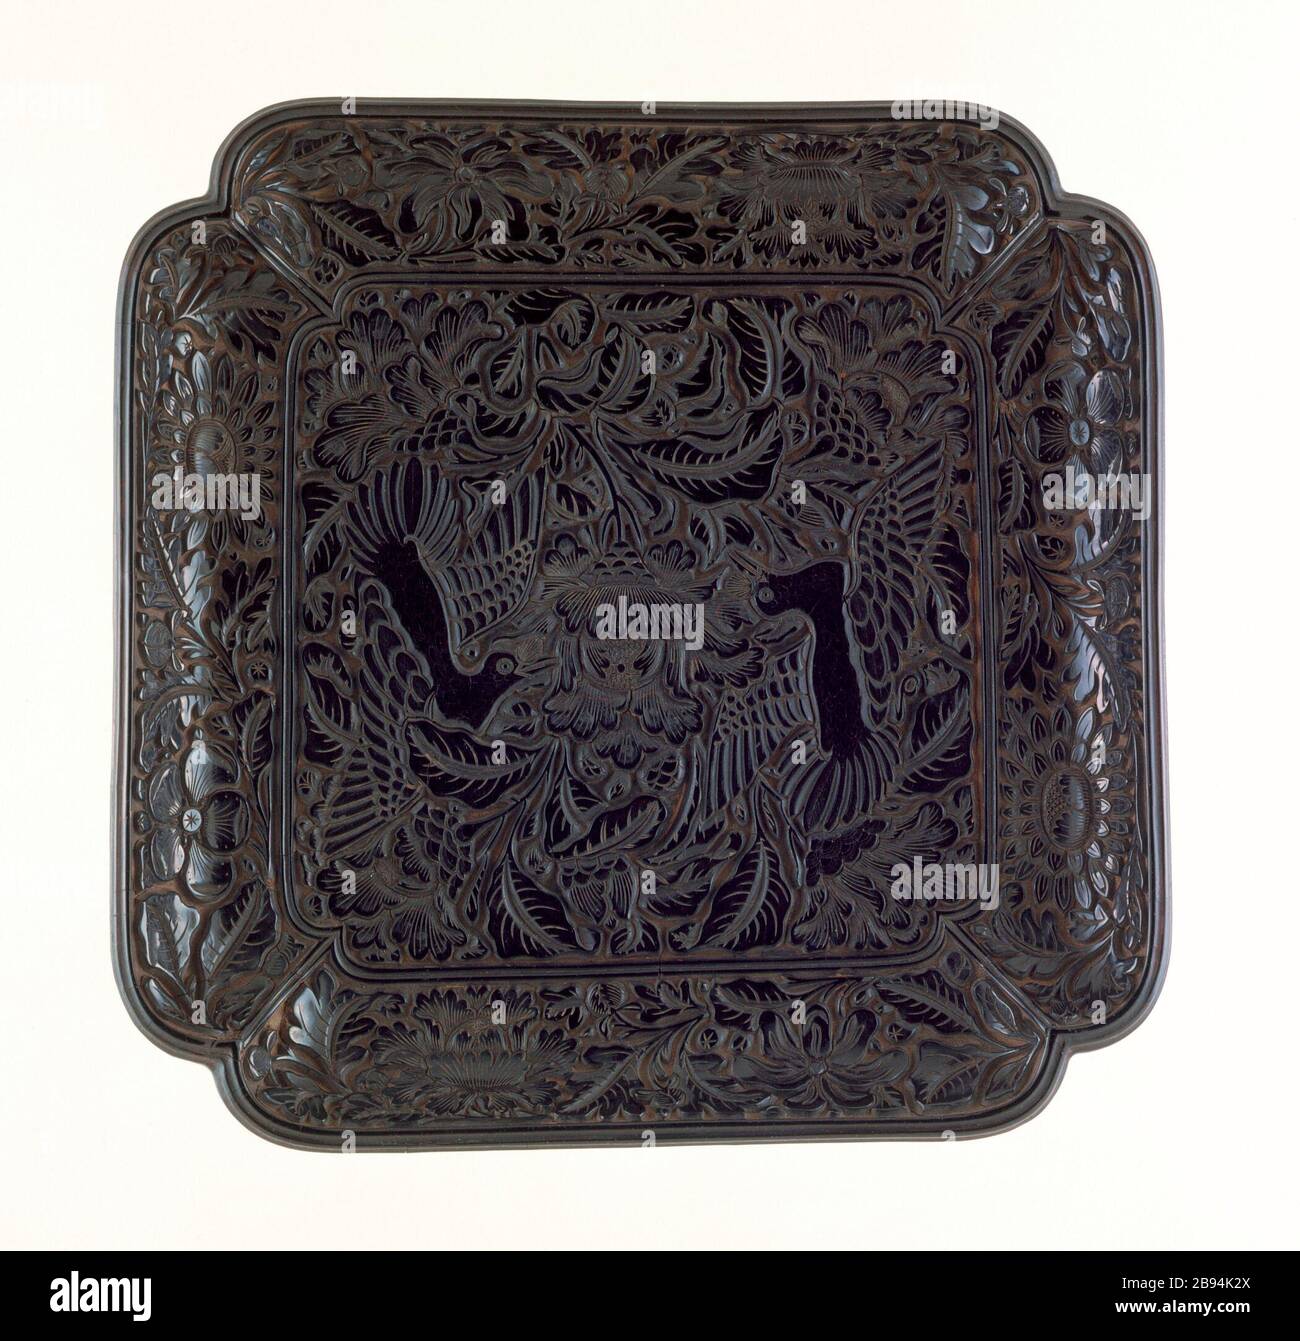 'Square Tray (Fang Pan) with Pair of Birds in Peonies (image 1 of 2); English:  China, Chinese, early Ming dynasty, about 1368-1450 Furnishings; Serviceware Carved black lacquer on wood core Gift of Mr. and Mrs Richard W. Chan (M.87.204.2) Chinese Art; between circa 1368 and circa 1450 date QS:P571,+1500-00-00T00:00:00Z/6,P1319,+1368-00-00T00:00:00Z/9,P1326,+1450-00-00T00:00:00Z/9,P1480,Q5727902; ' Stock Photo